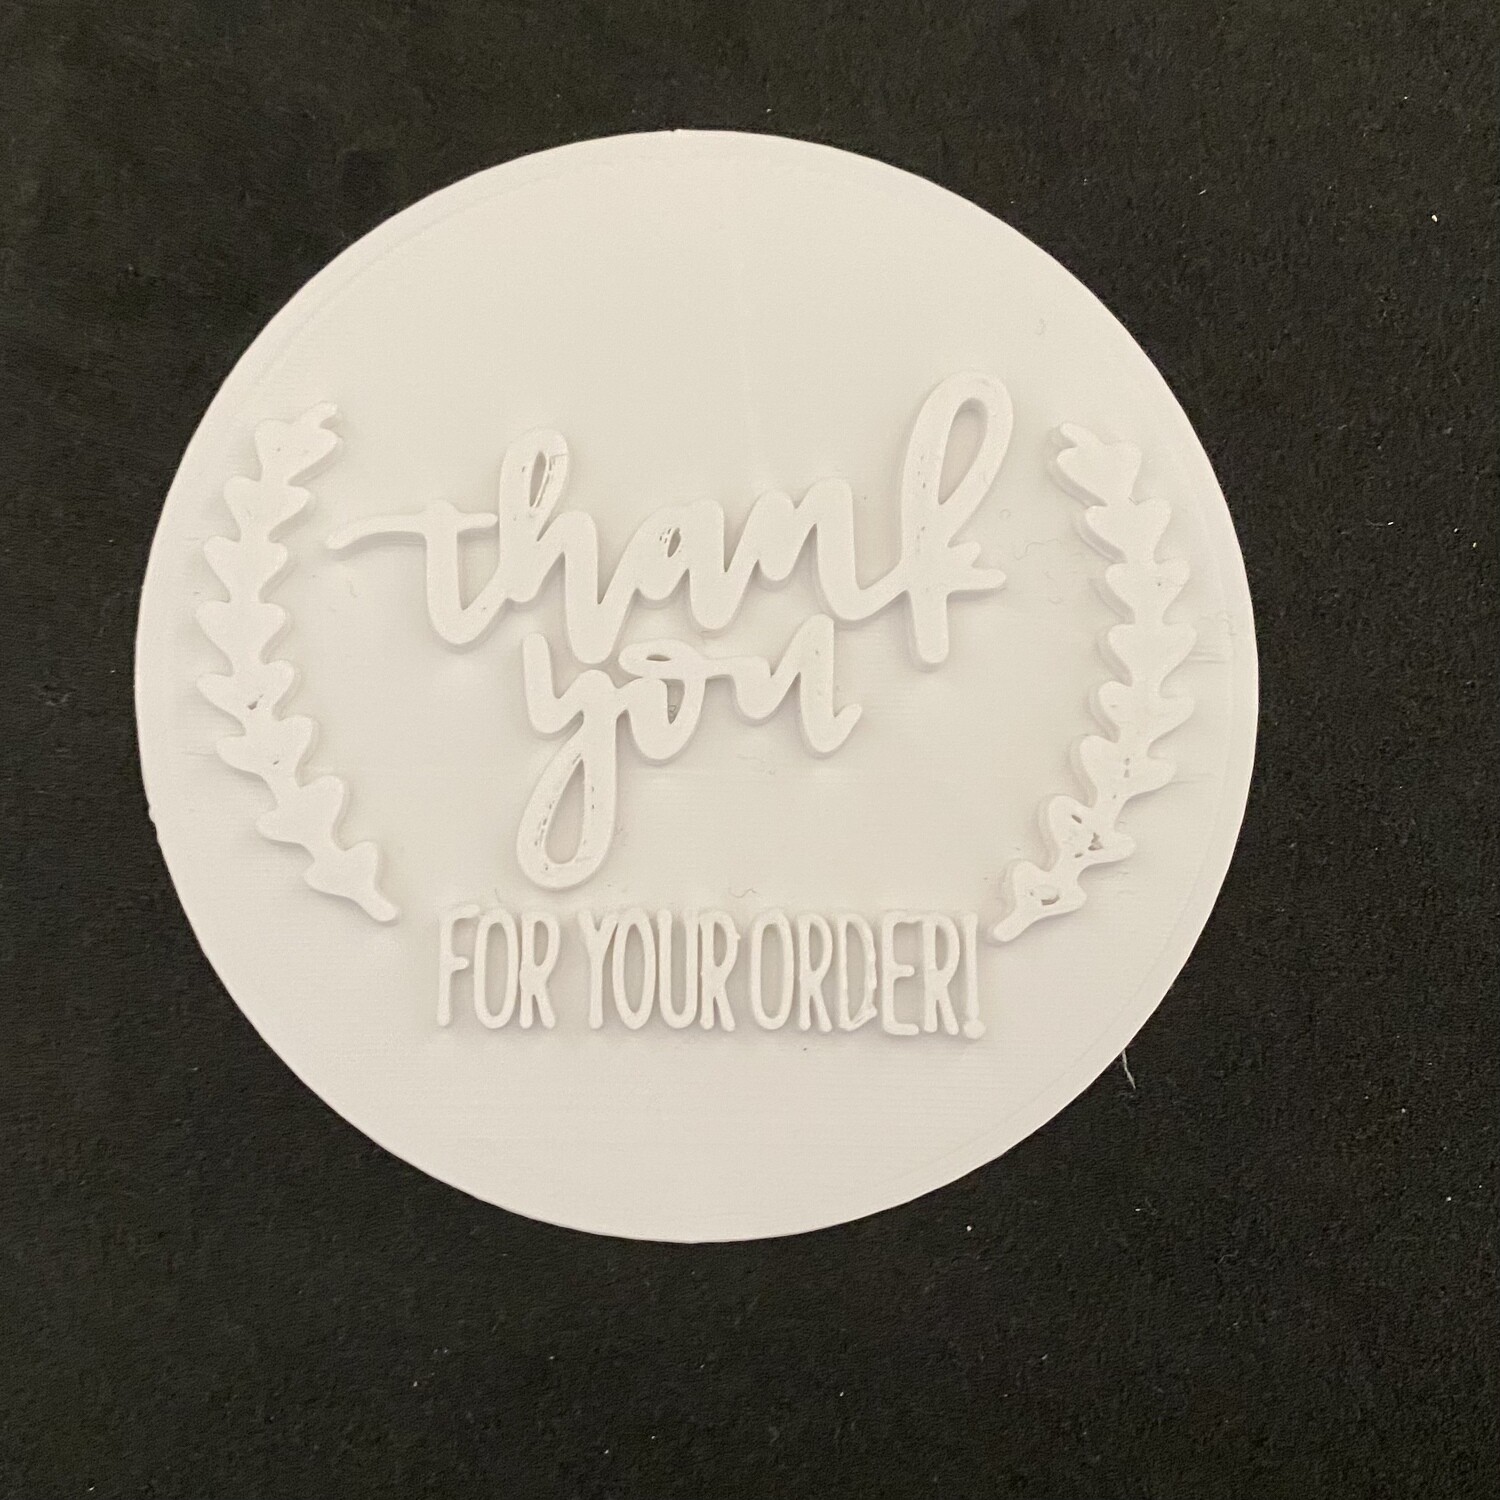 Thank you for your order! stamp only